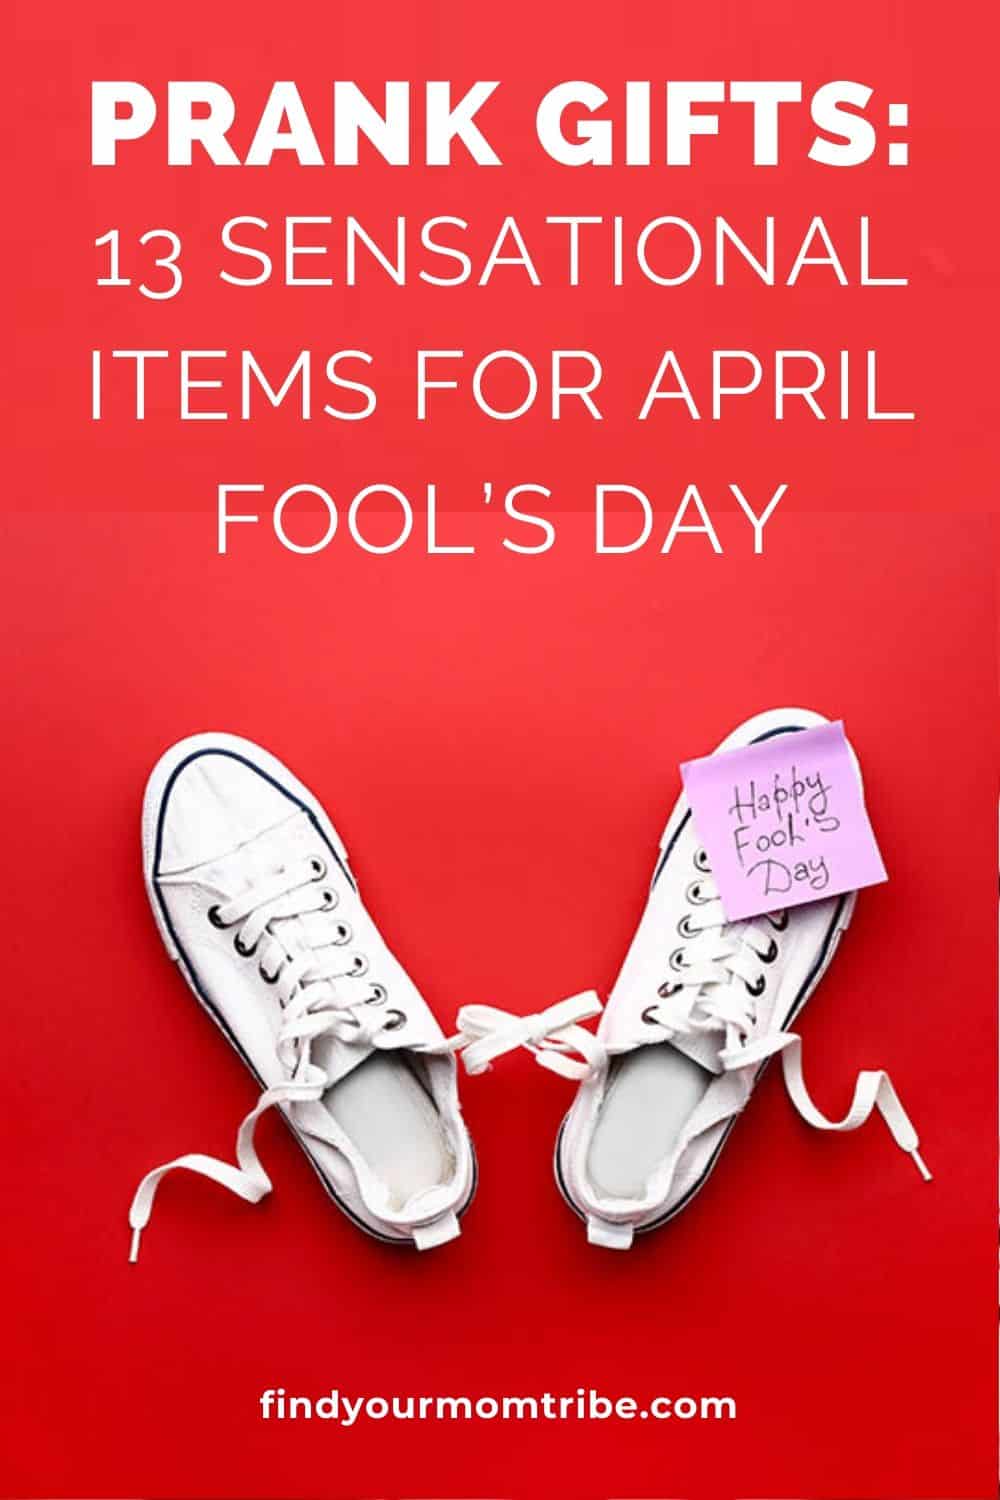 Prank Gifts: 13 Sensational Items For April Fool’s Day